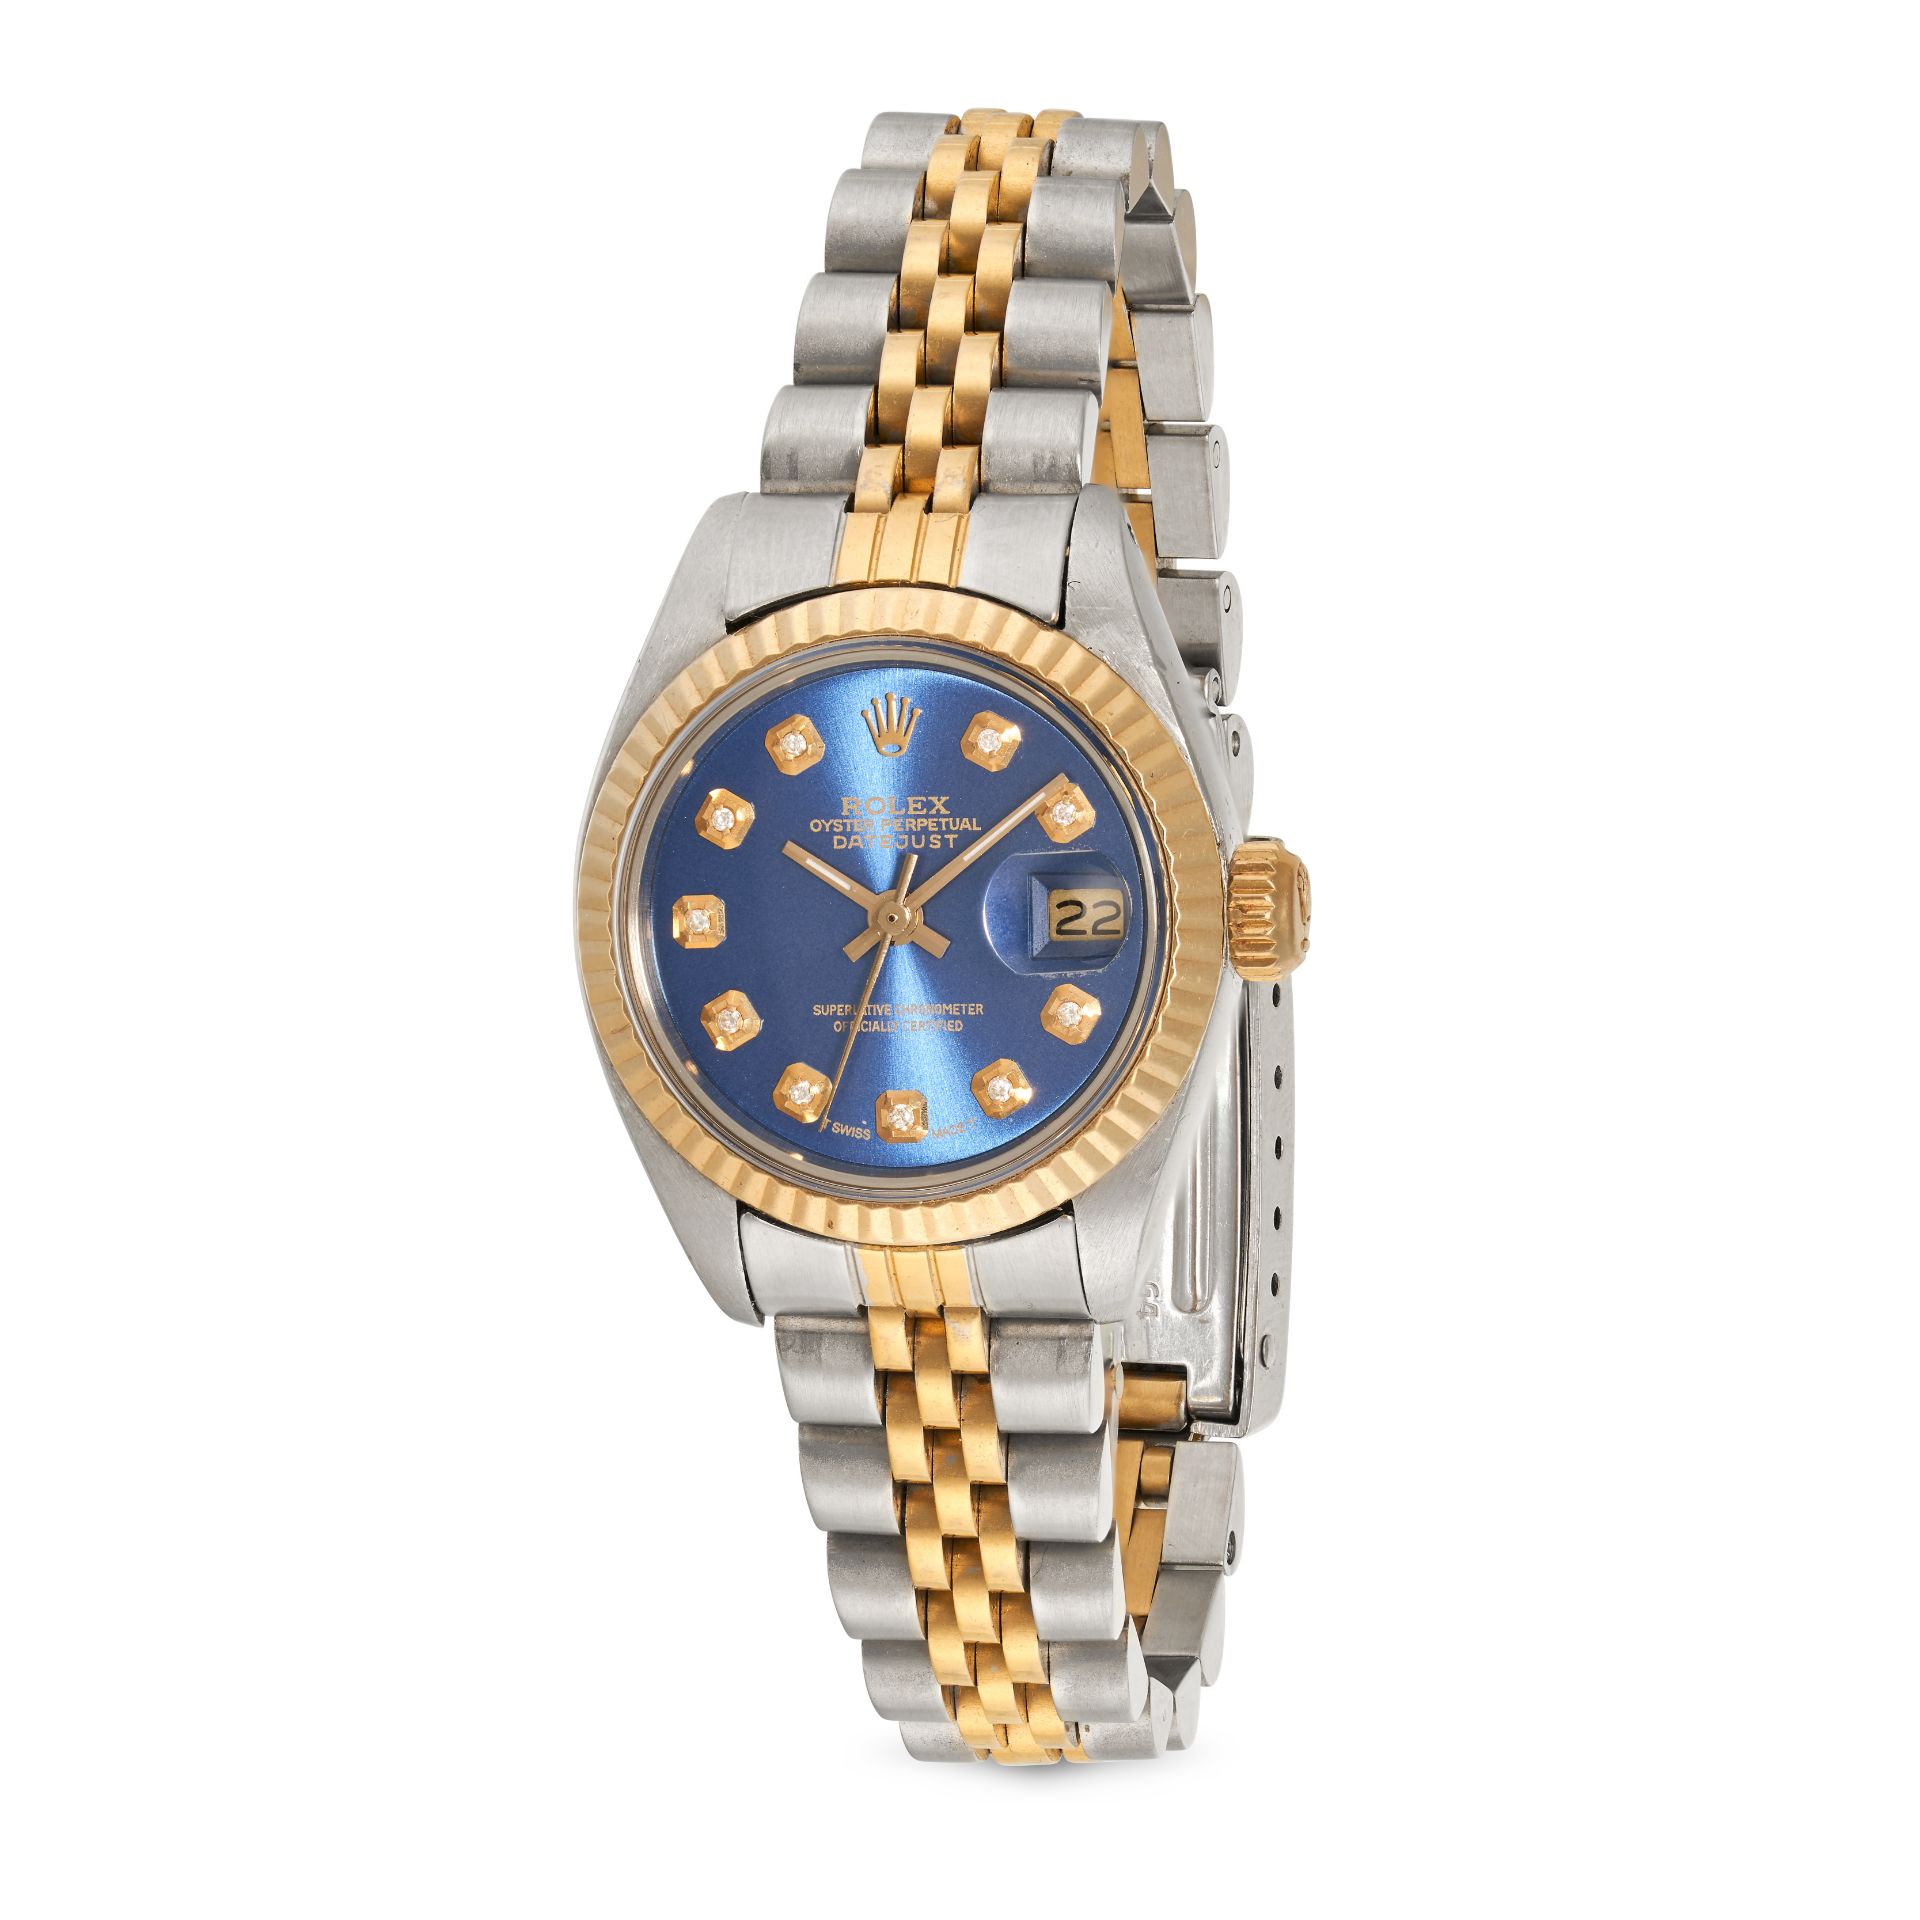 ROLEX - A VINTAGE LADIES BIMETAL ROLEX OYSTER PERPETUAL DATEJUST in stainless steel and yellow go...